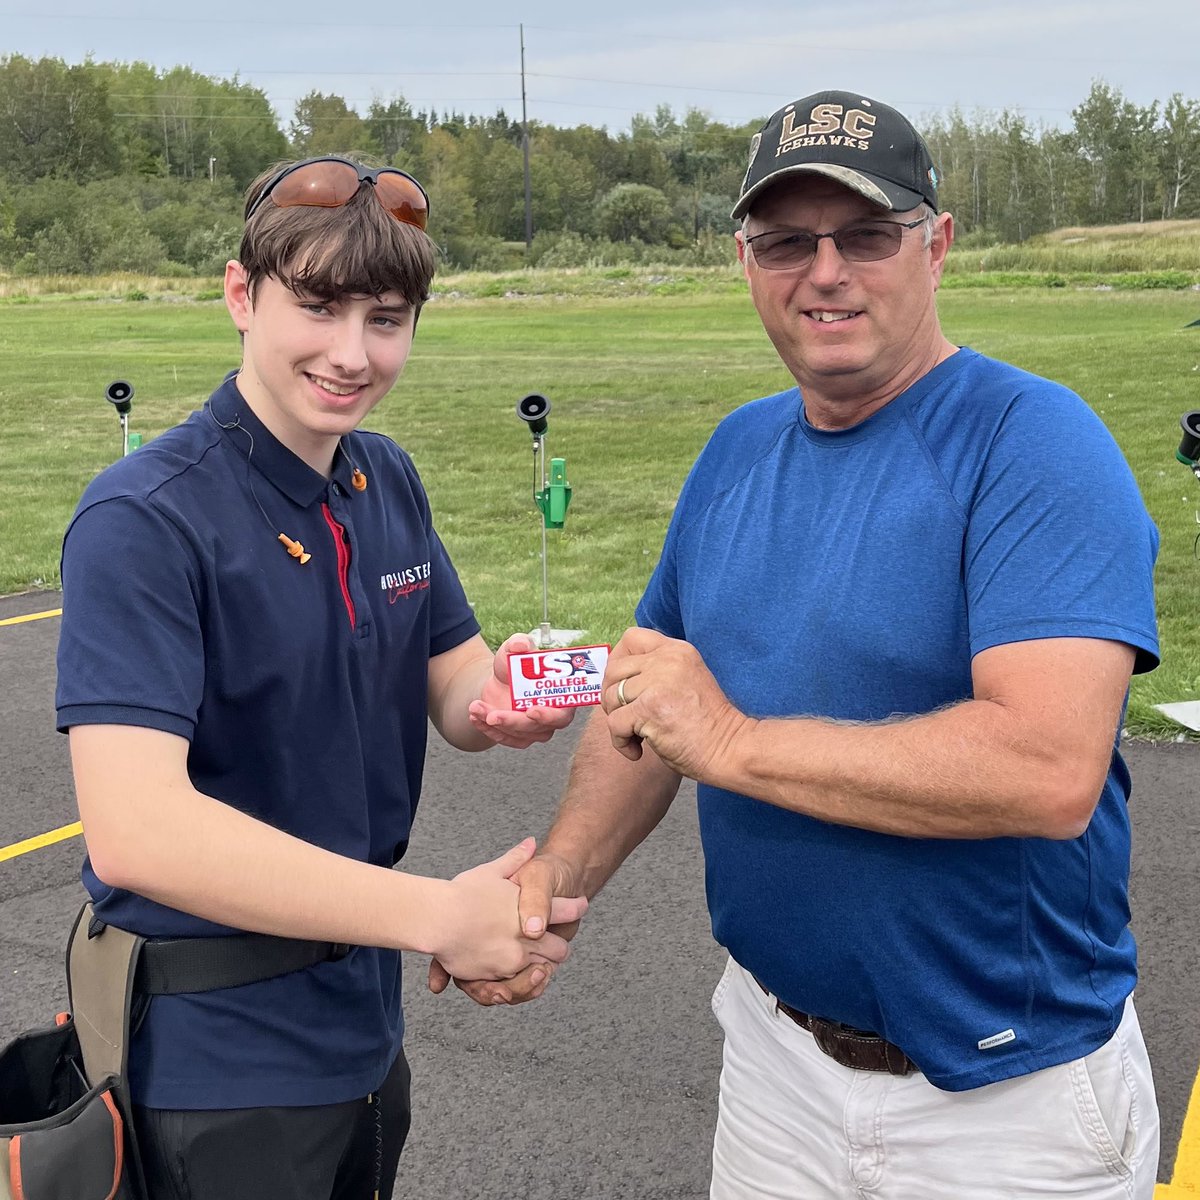 @LSC_Duluth: Some great results to report for Lake Superior College’s Clay Target team: Alex Gjessing – 50 straightReese Peterson - 50 straightJames Theobald - 100 straightJames Girth – 50 straight Congrats, everyone! #GoIceHawks #LakeSuperiorCollege #ClayTarget